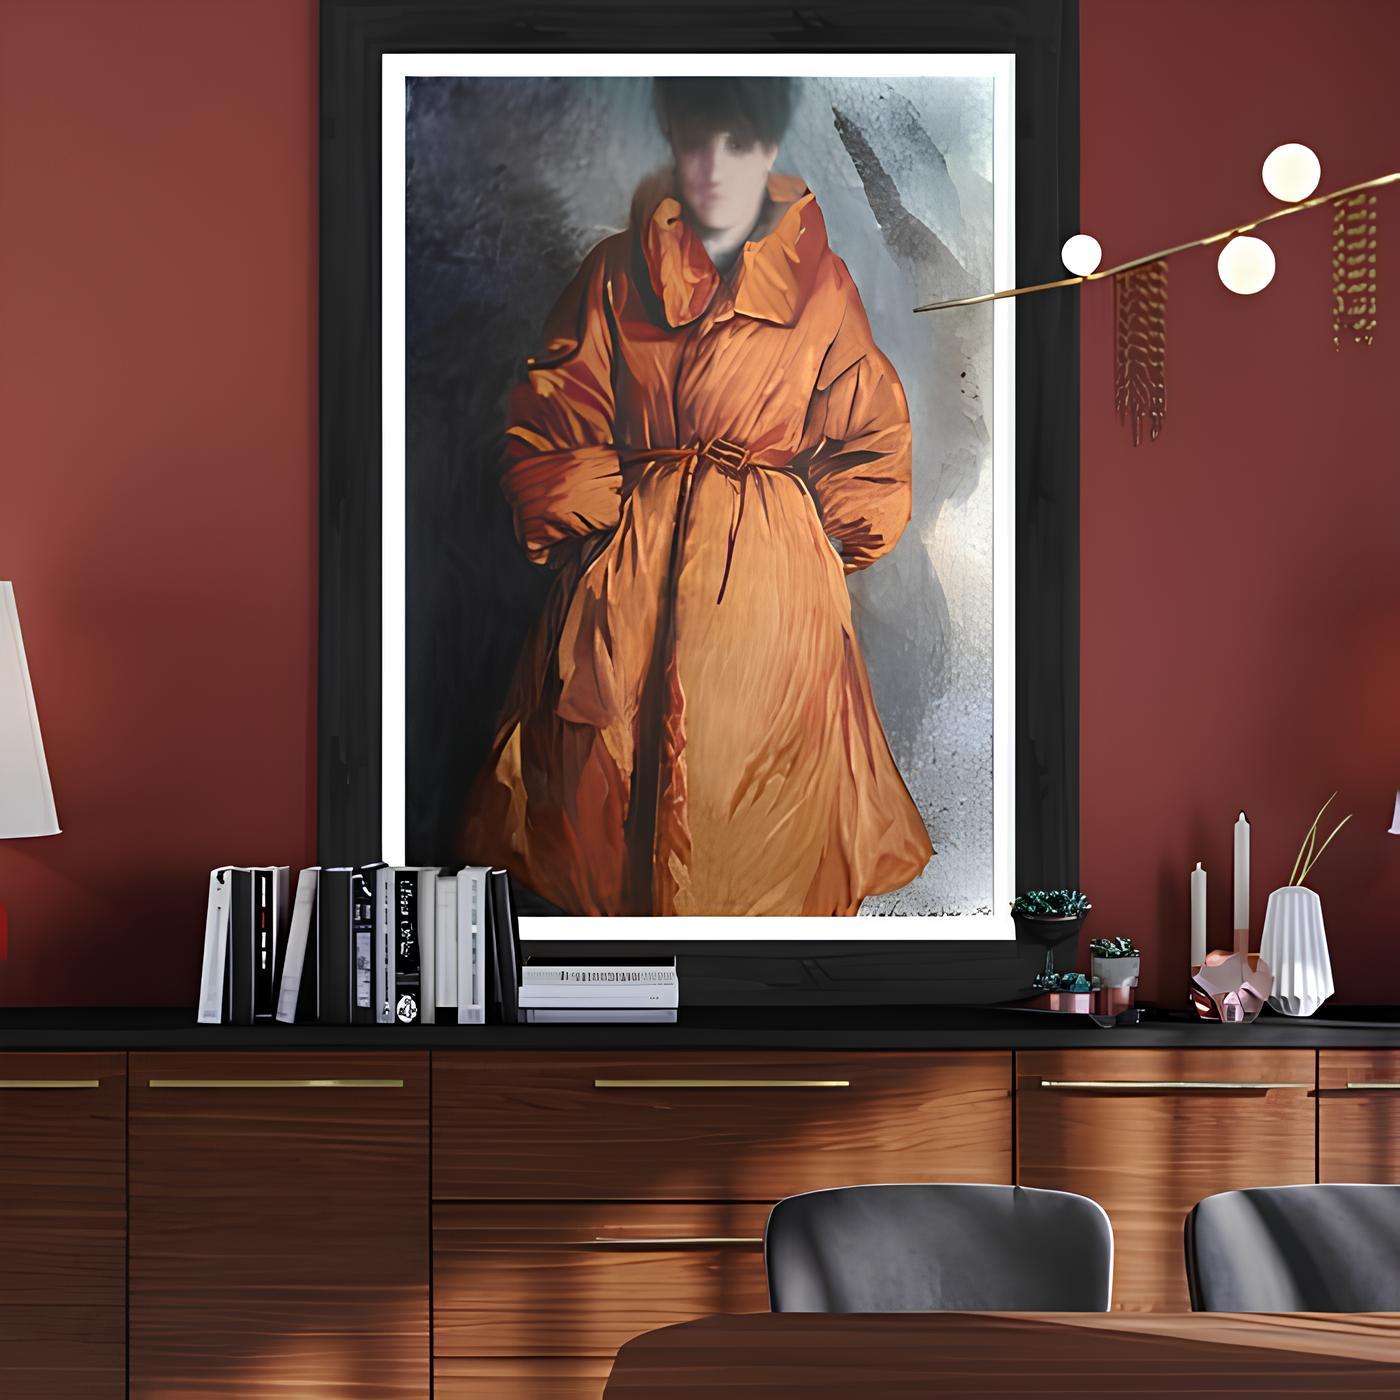 Through my artwork, I sought to capture the timeless allure of elegance and introspection. The rich oil on paper dance to create a figure robed in a coat radiating warmth and mystery. It's an homage to the personal narratives we wrap ourselves in,